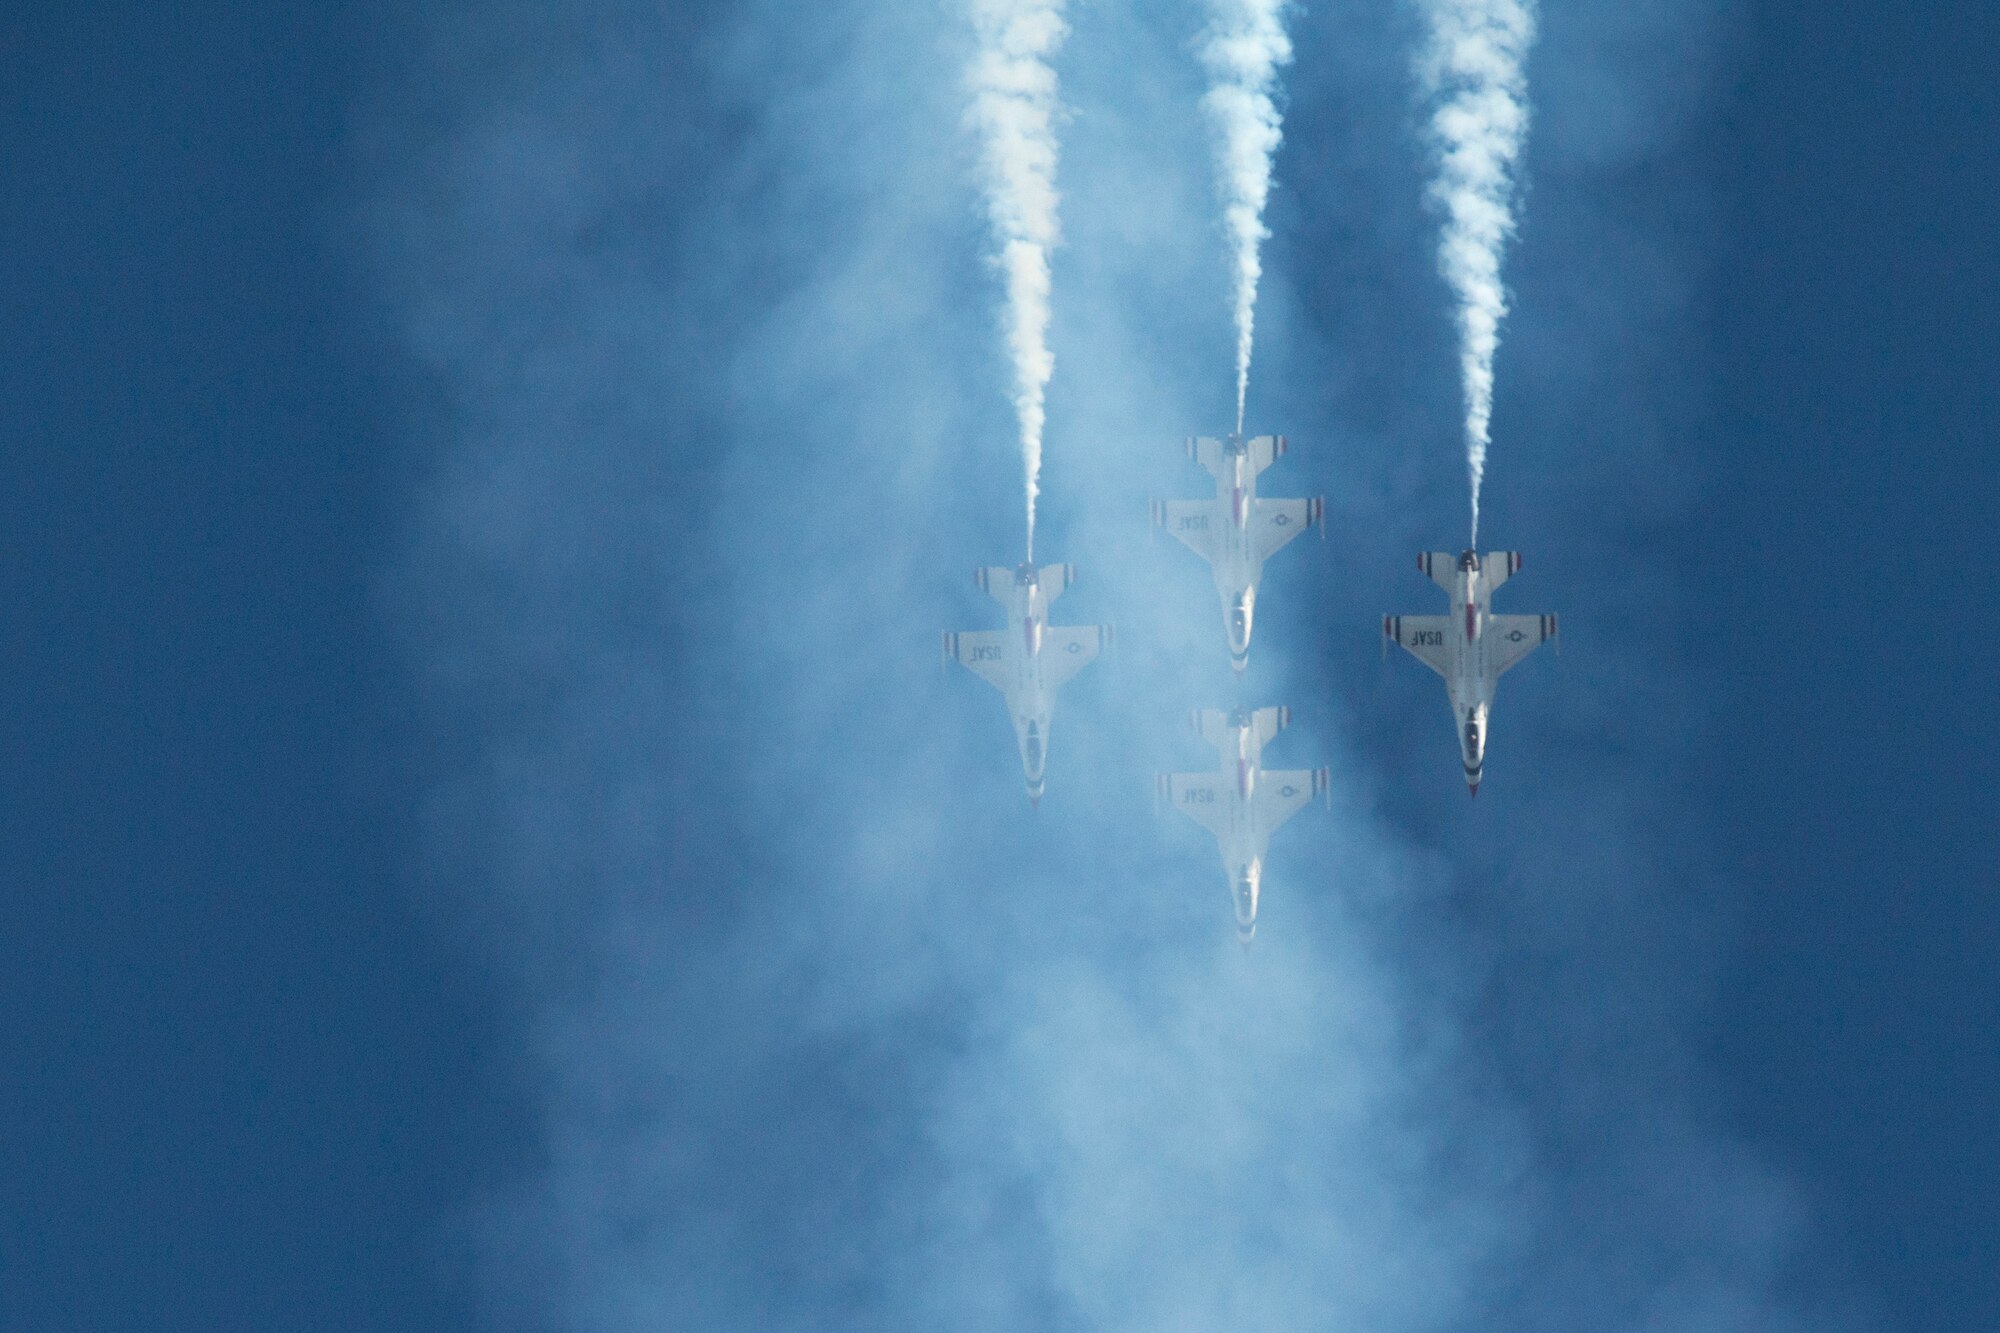 The U.S. Air Force Thunderbirds Flight Demonstration Team soars above Moody Air Force Base during the Thunder Over South Georgia Airshow, Oct. 29, 2017. The Thunderbirds, based out of Nellis Air Force Base, Nev., are the Air Force’s premier aerial demonstration team, performing at air shows and special events worldwide. (U.S. Air Force photo by Senior Airman Daniel Snider)